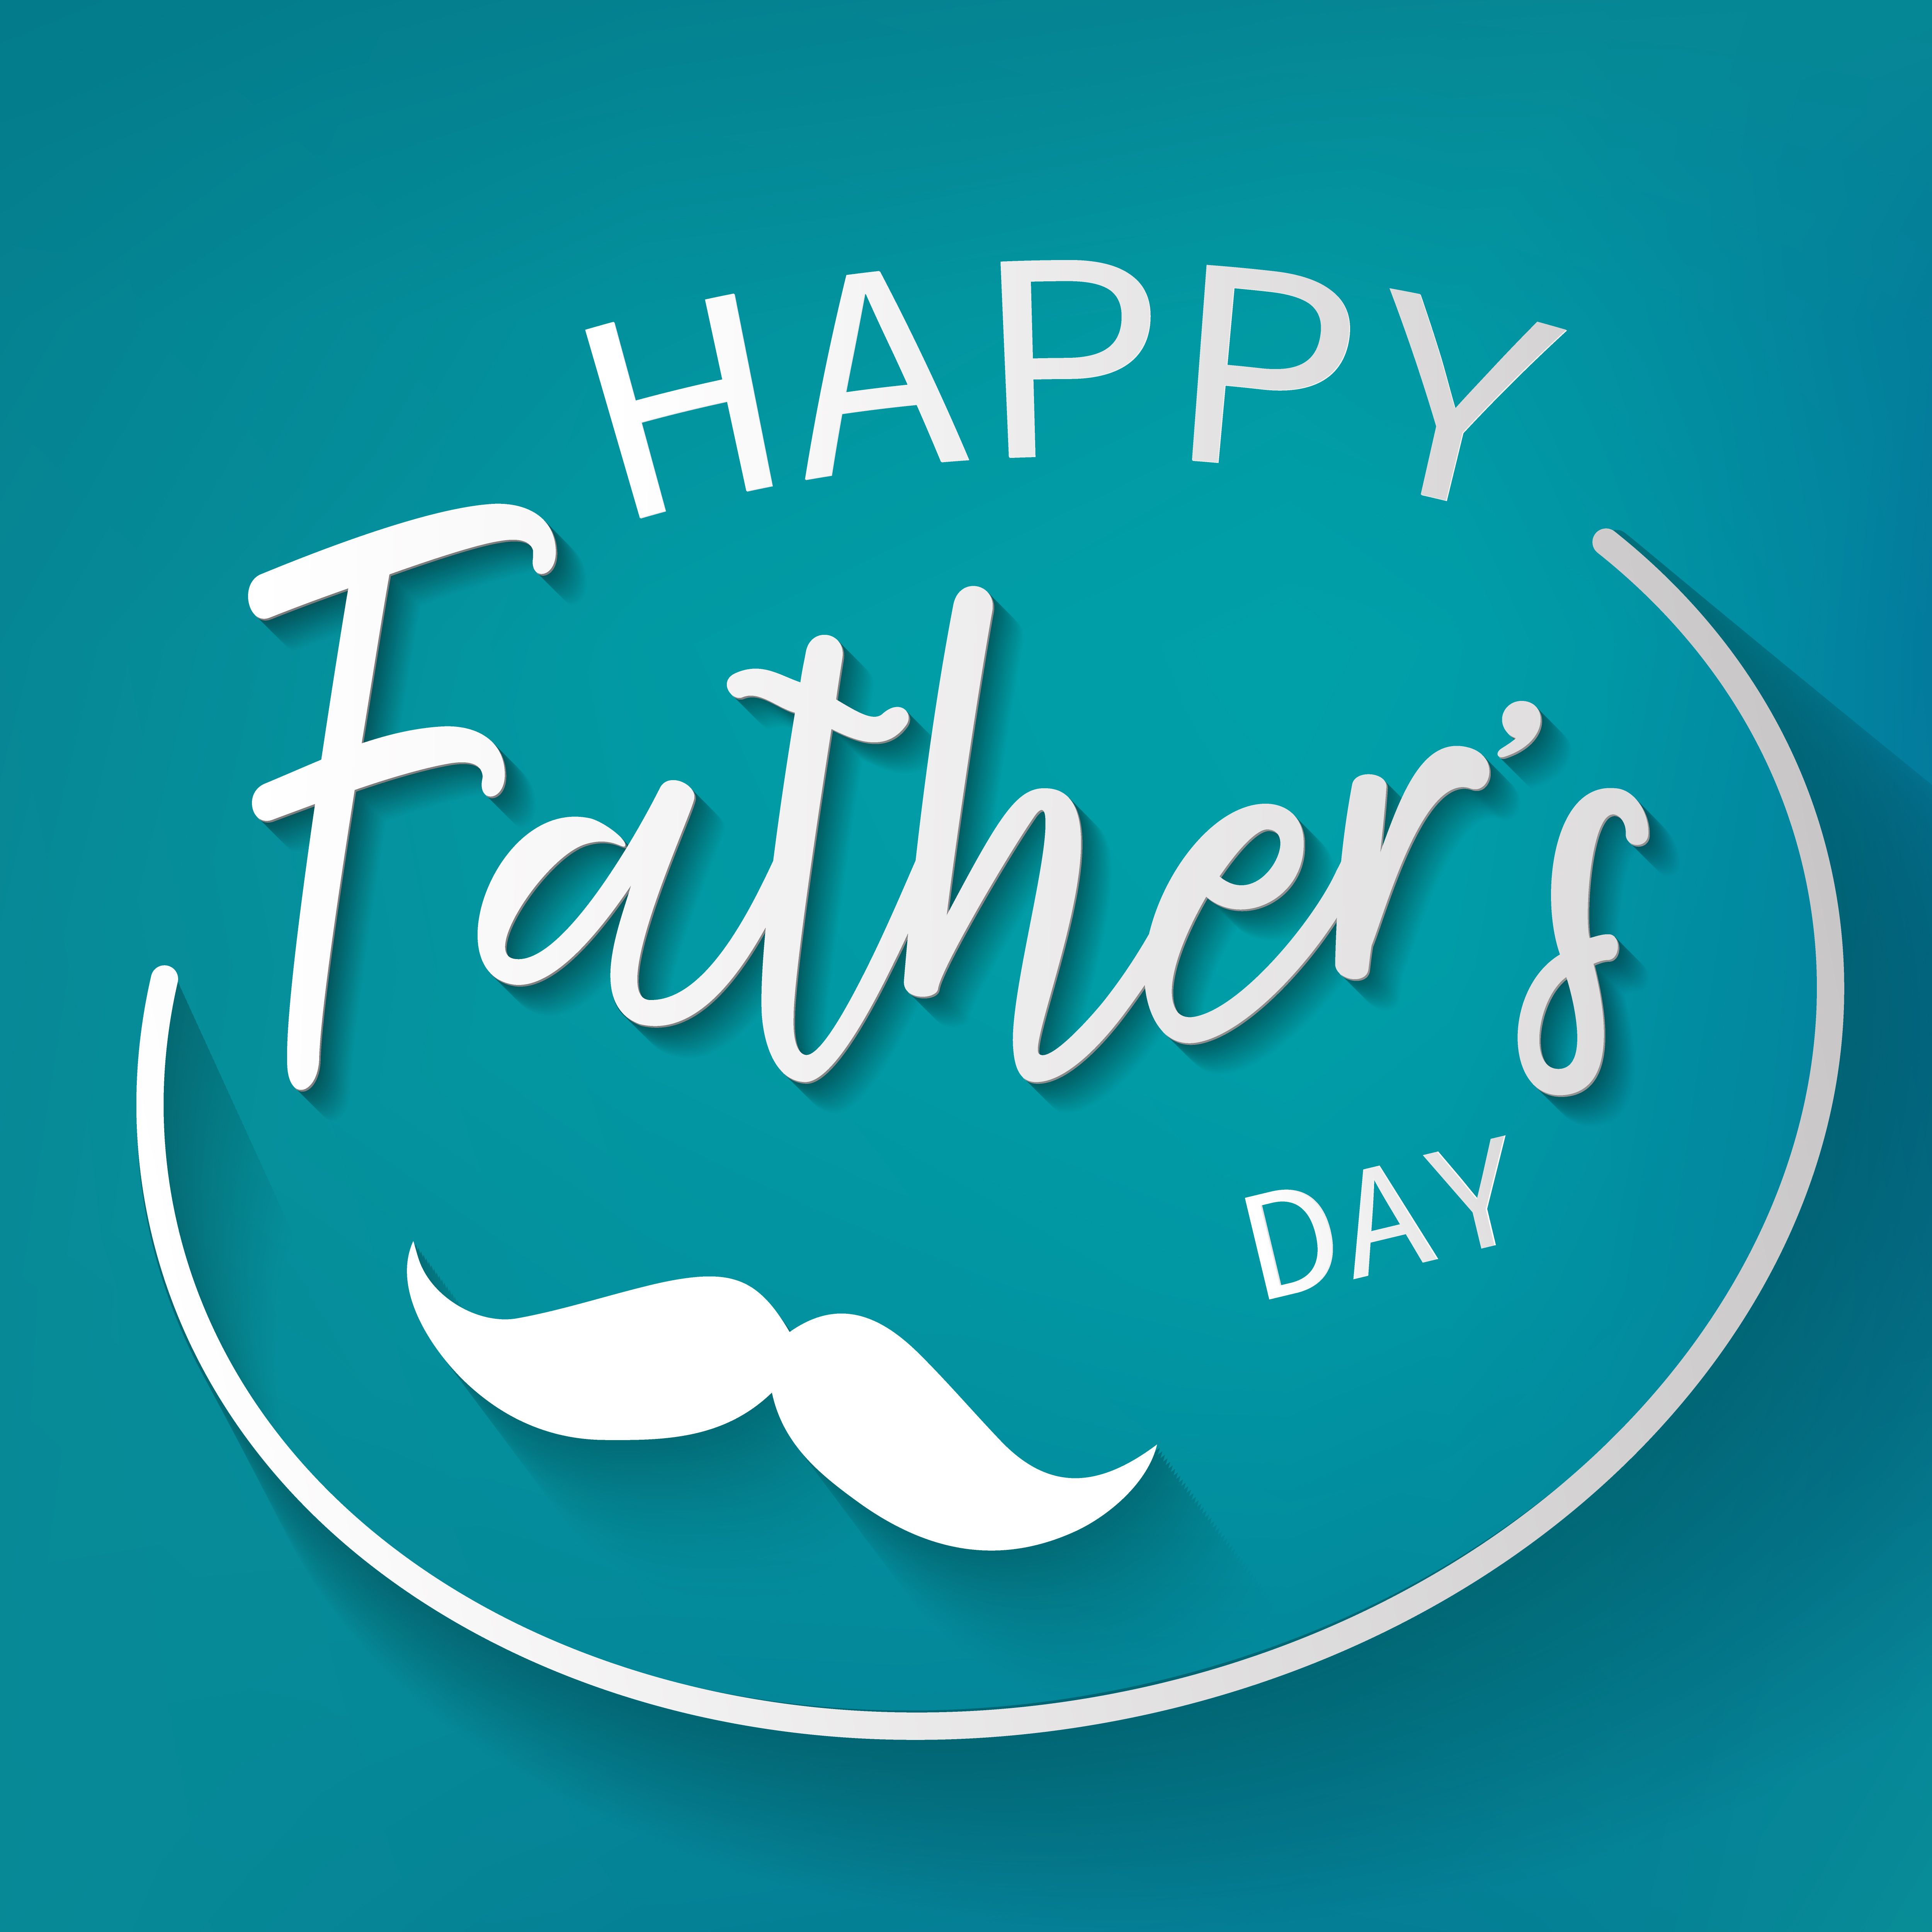 Happy Father's Day Cards Wallpapers - Wallpaper Cave